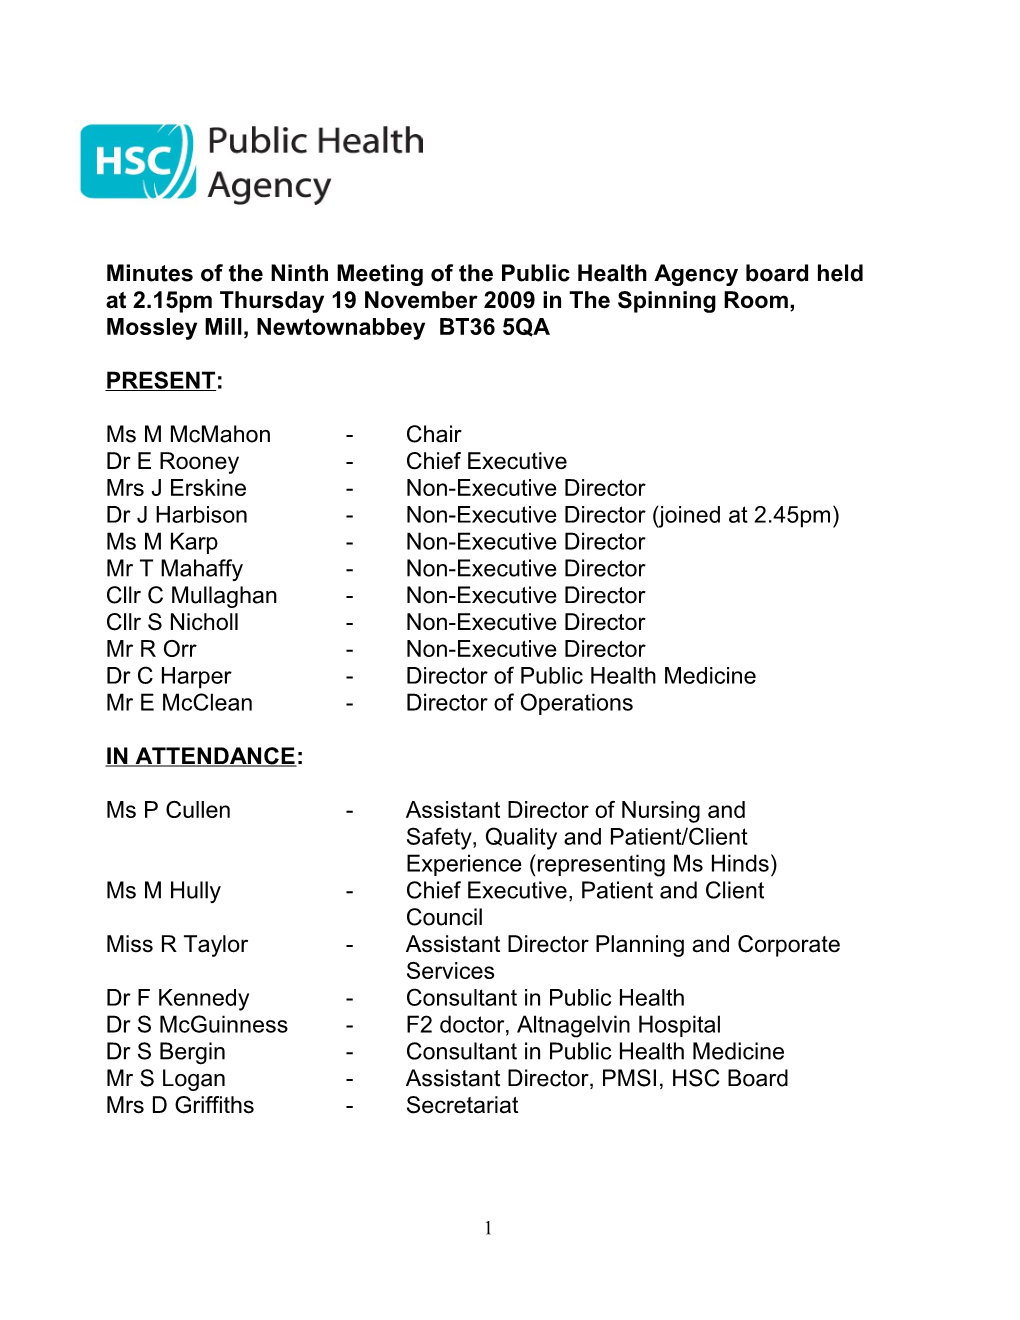 Minutes of the Ninth Meeting of the Public Health Agency Board Held at 2.15Pm Thursday